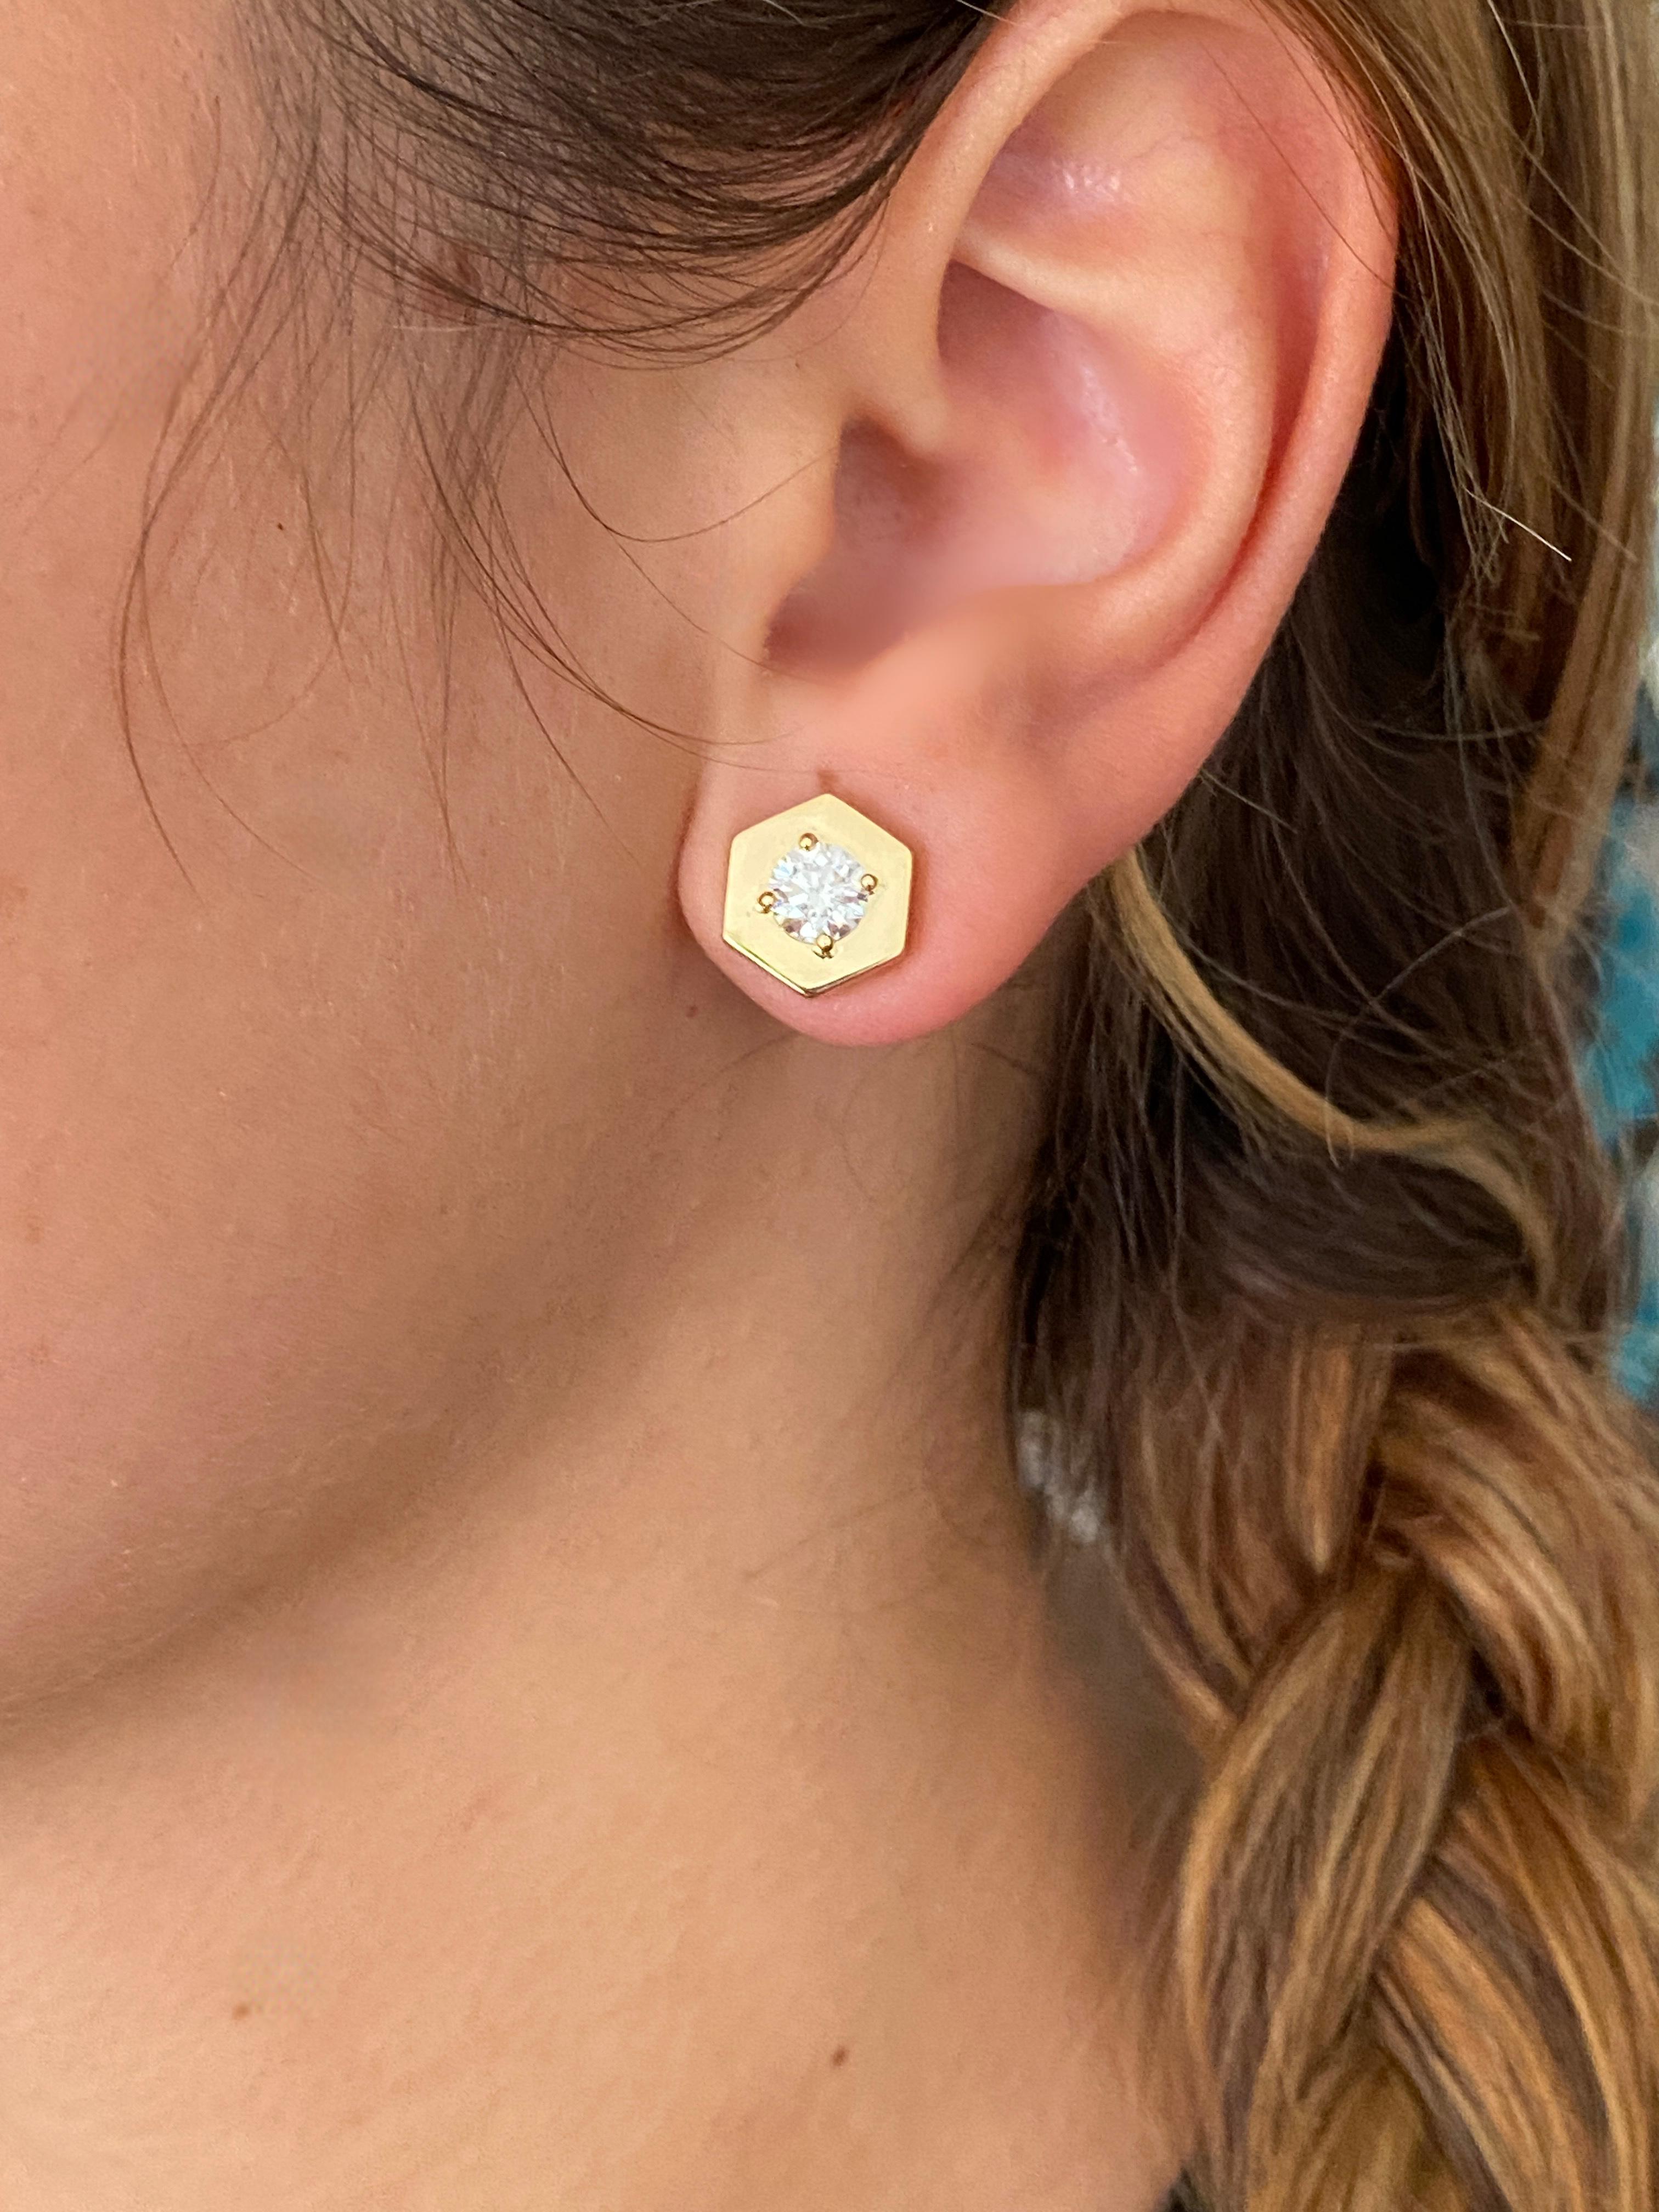 Experience the allure of Rossella Ugolini's Hexagonal Stud Earrings, a testament to the harmonious fusion of simplicity and elegance. These exquisite earrings are handcrafted in the heart of Italy, bearing the mark of true artisan craftsmanship.

At